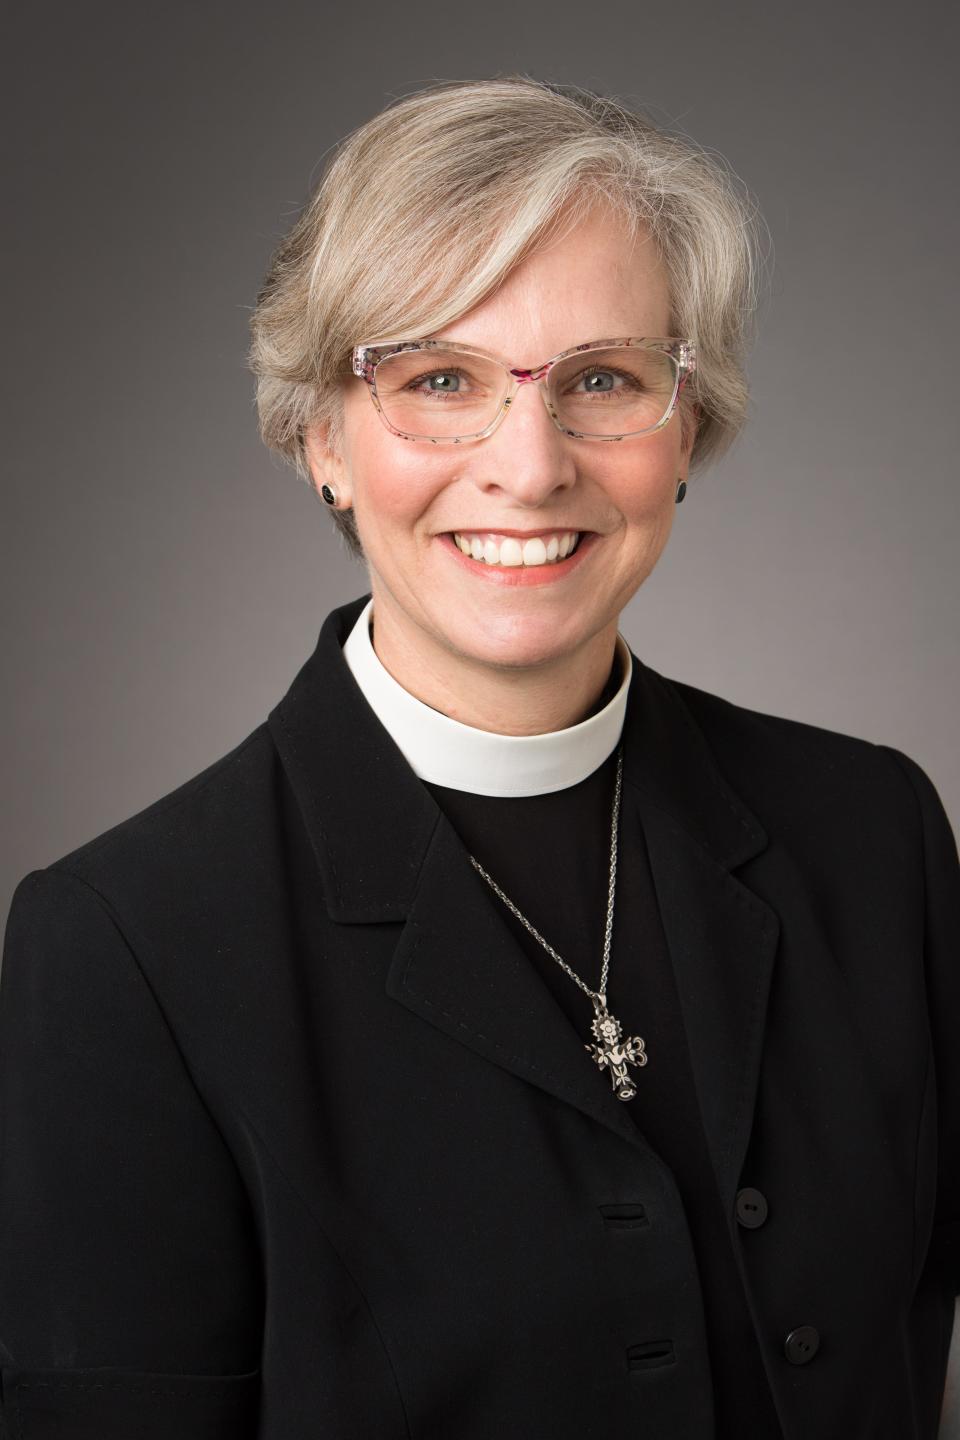 The Rev. Katie Wright is the rector of St. Matthew’s Episcopal Church